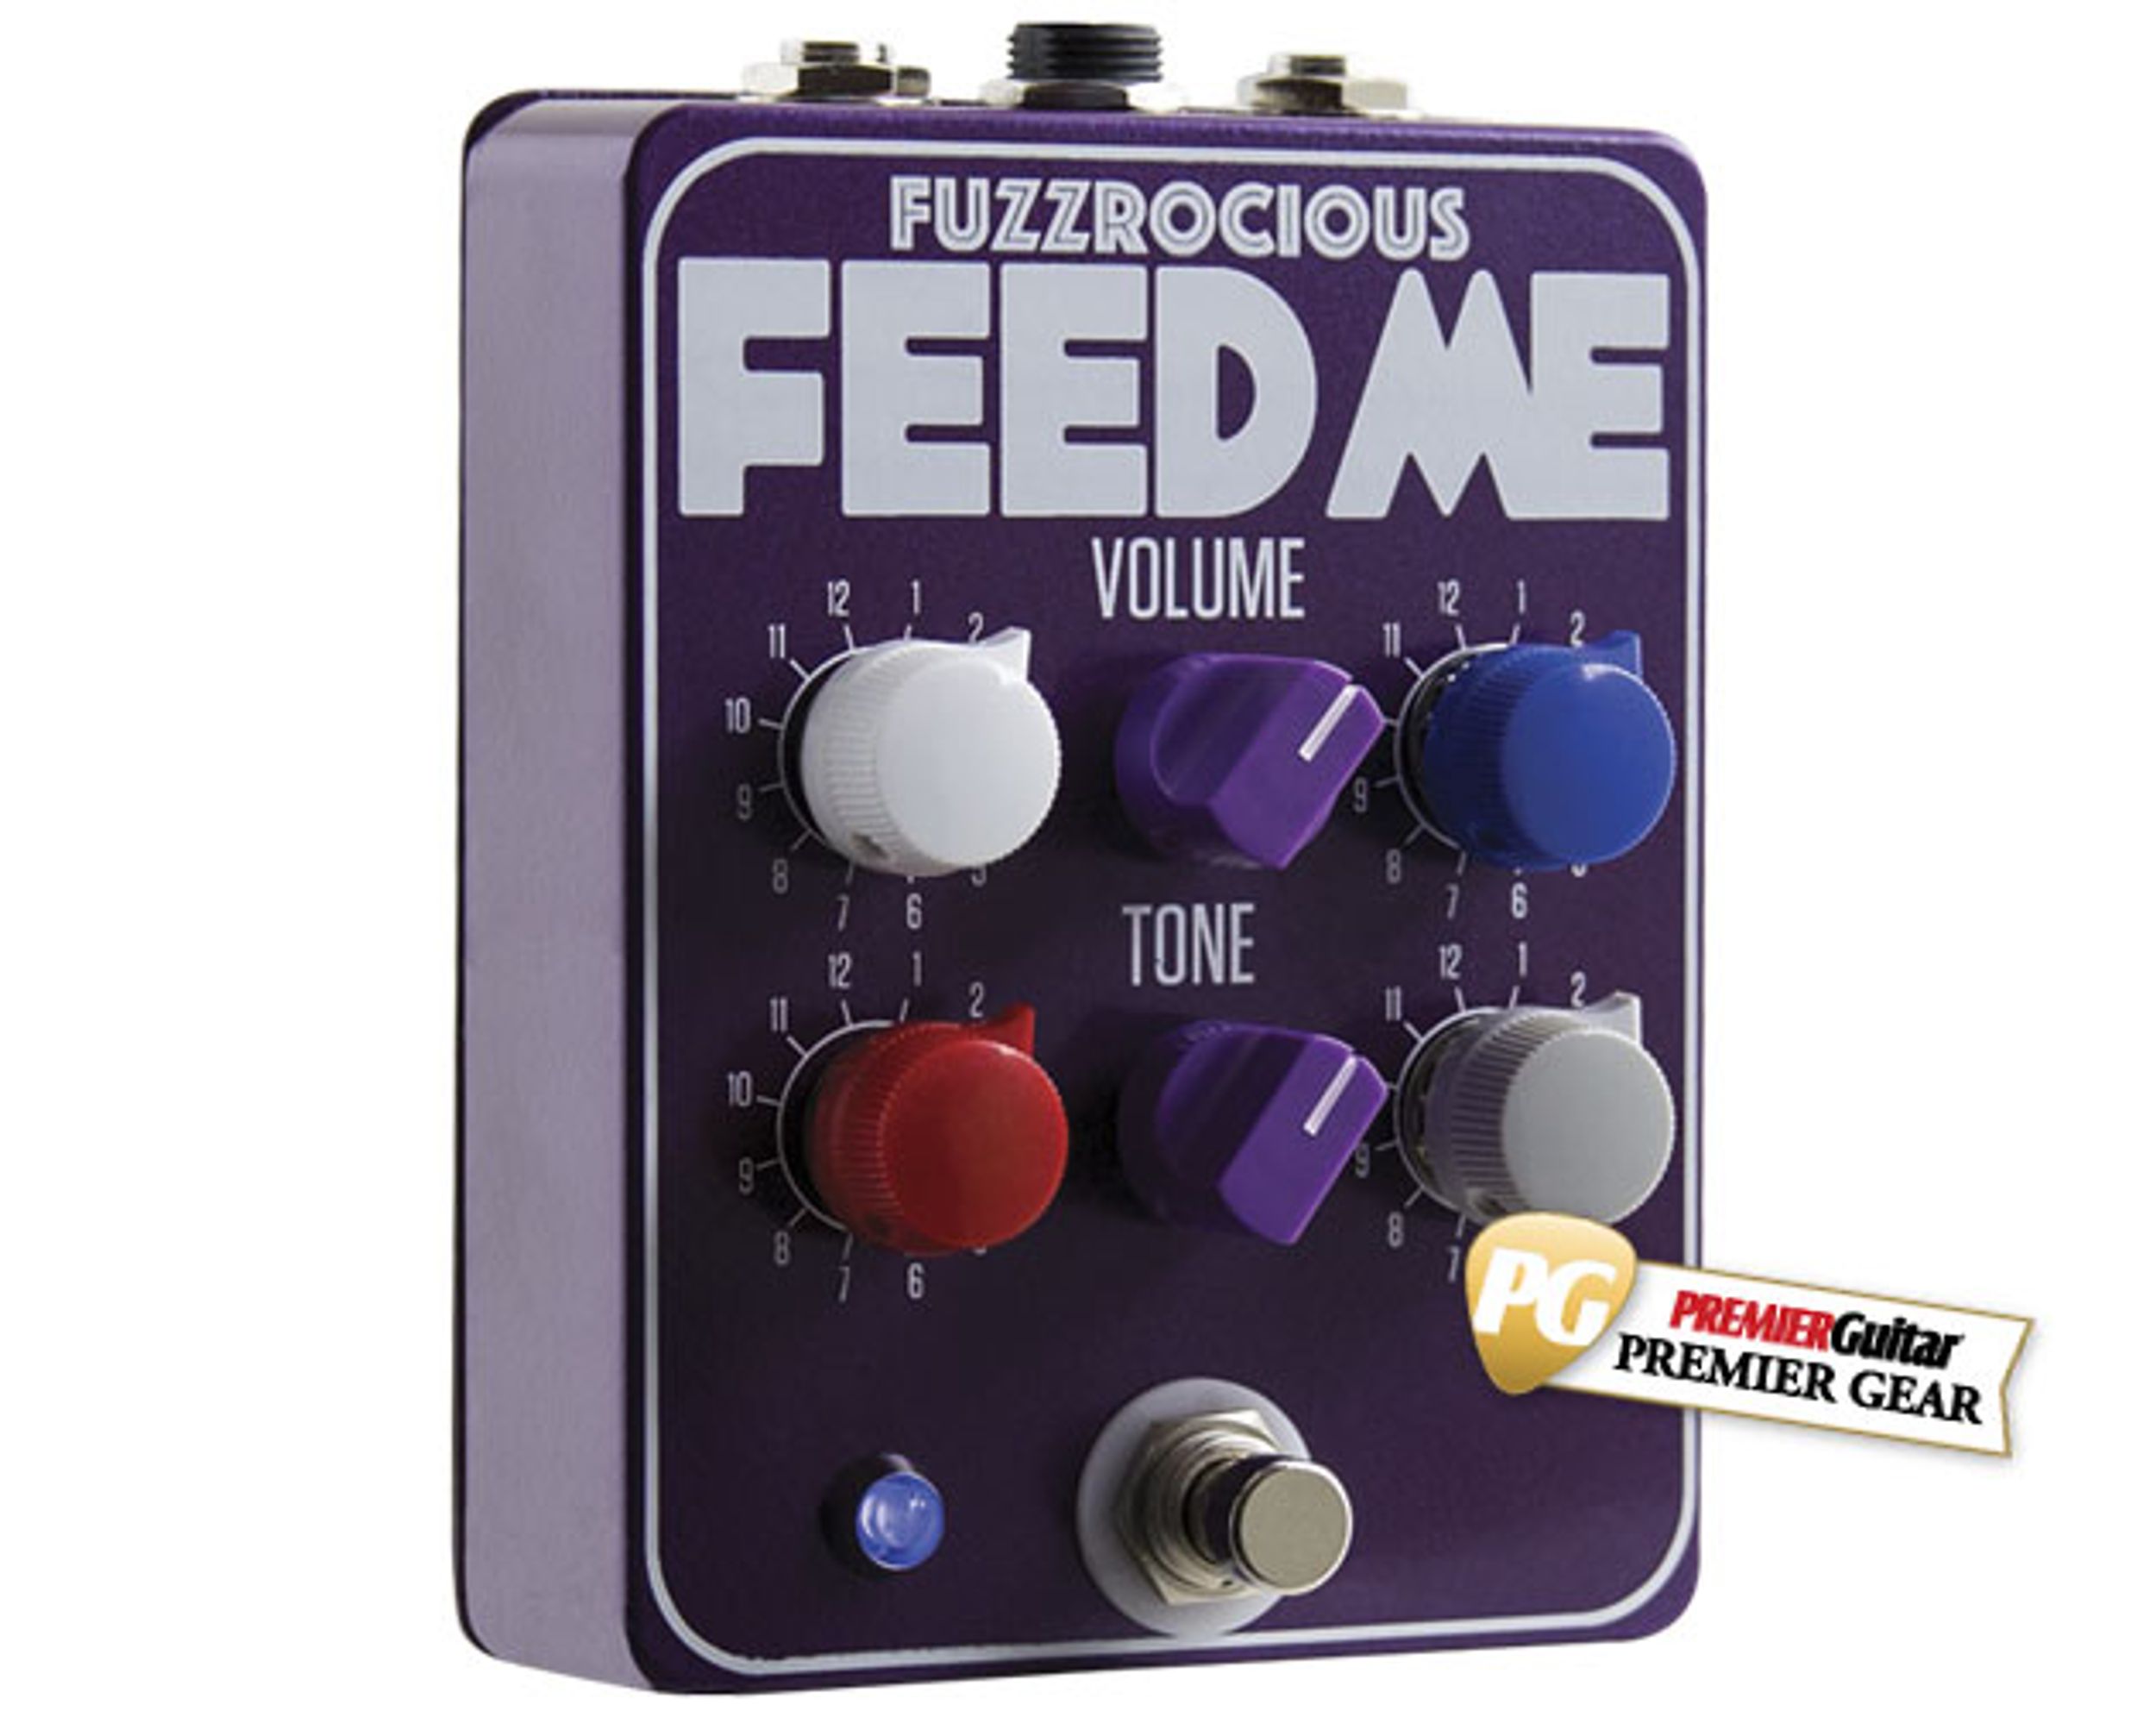 Fuzzrocious Feed Me Review